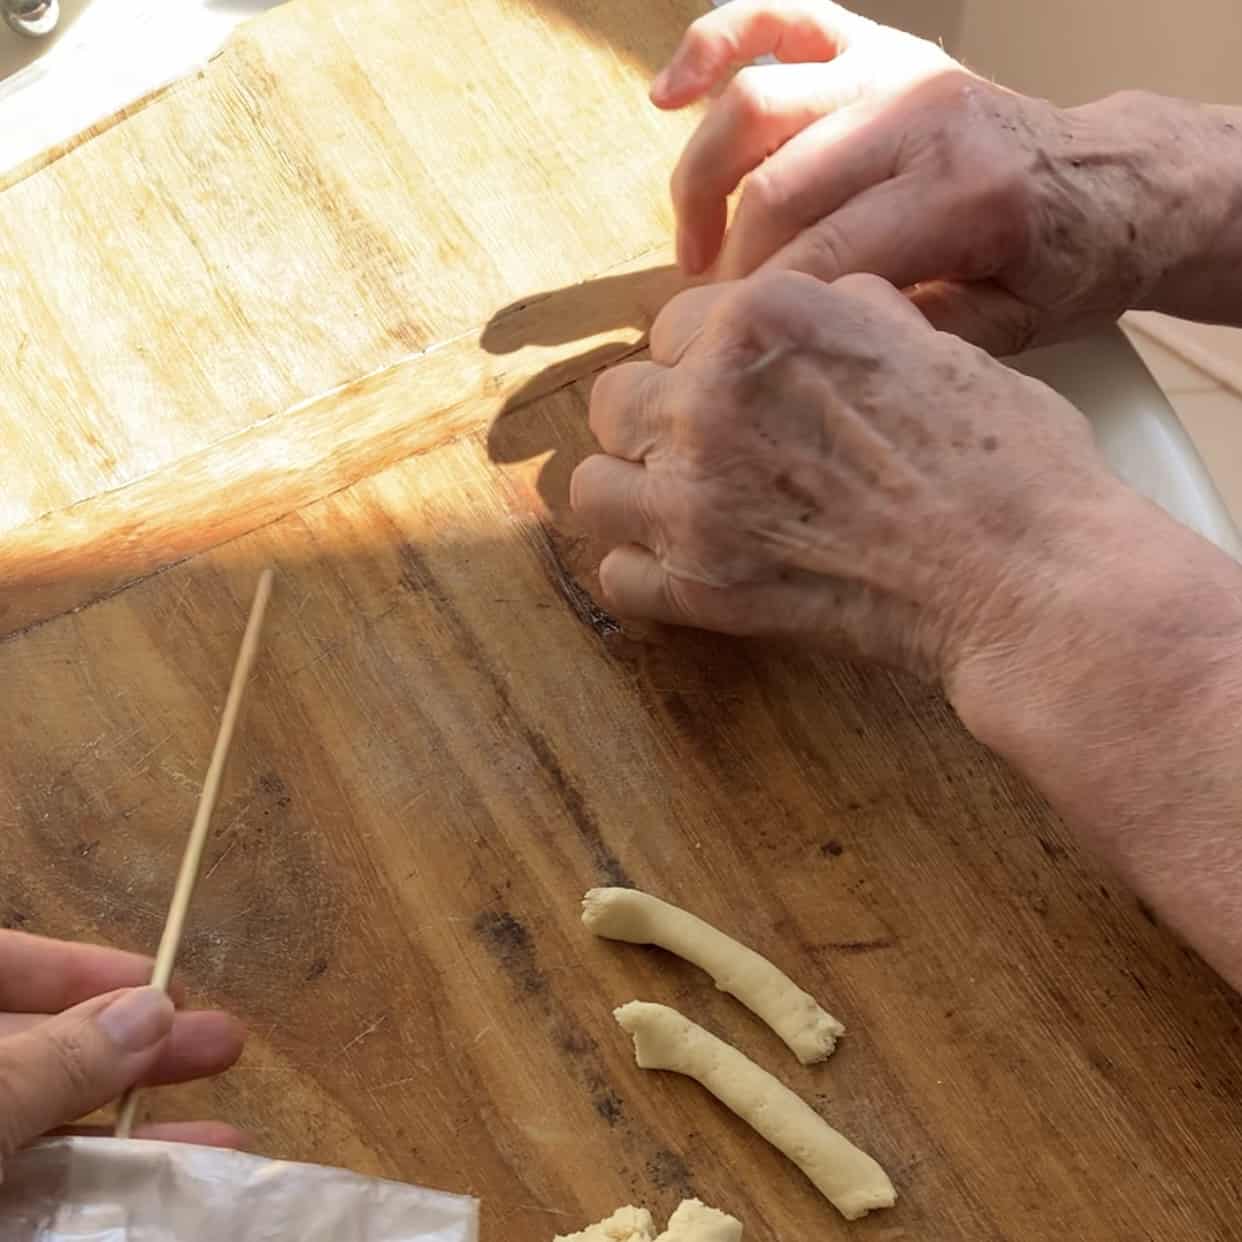 pinching off pieces of rope (dough) to make fusilli